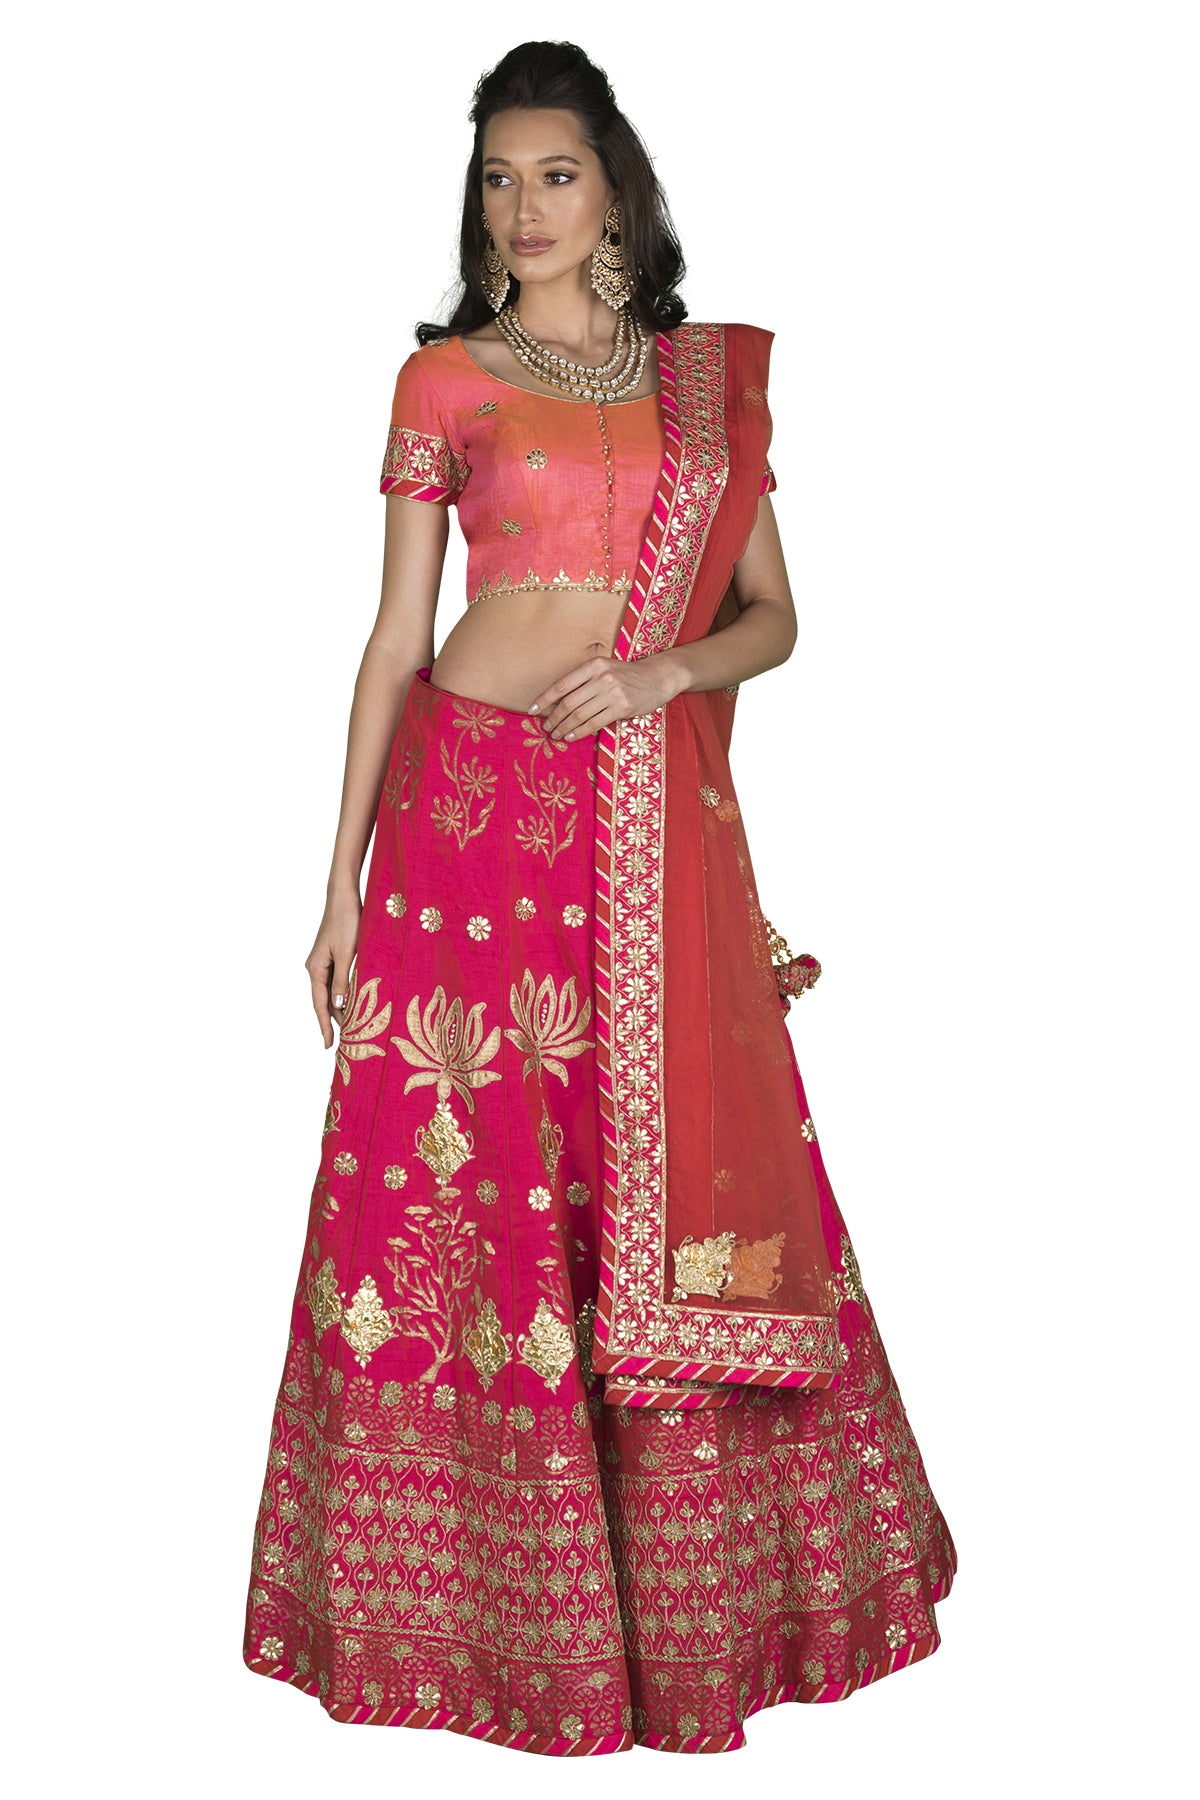 In a medley of the most festive colours, this pink & orange two-toned silk choli will sweep you away with its pink gota and threadwork lehenga decorated with lotus motifs.